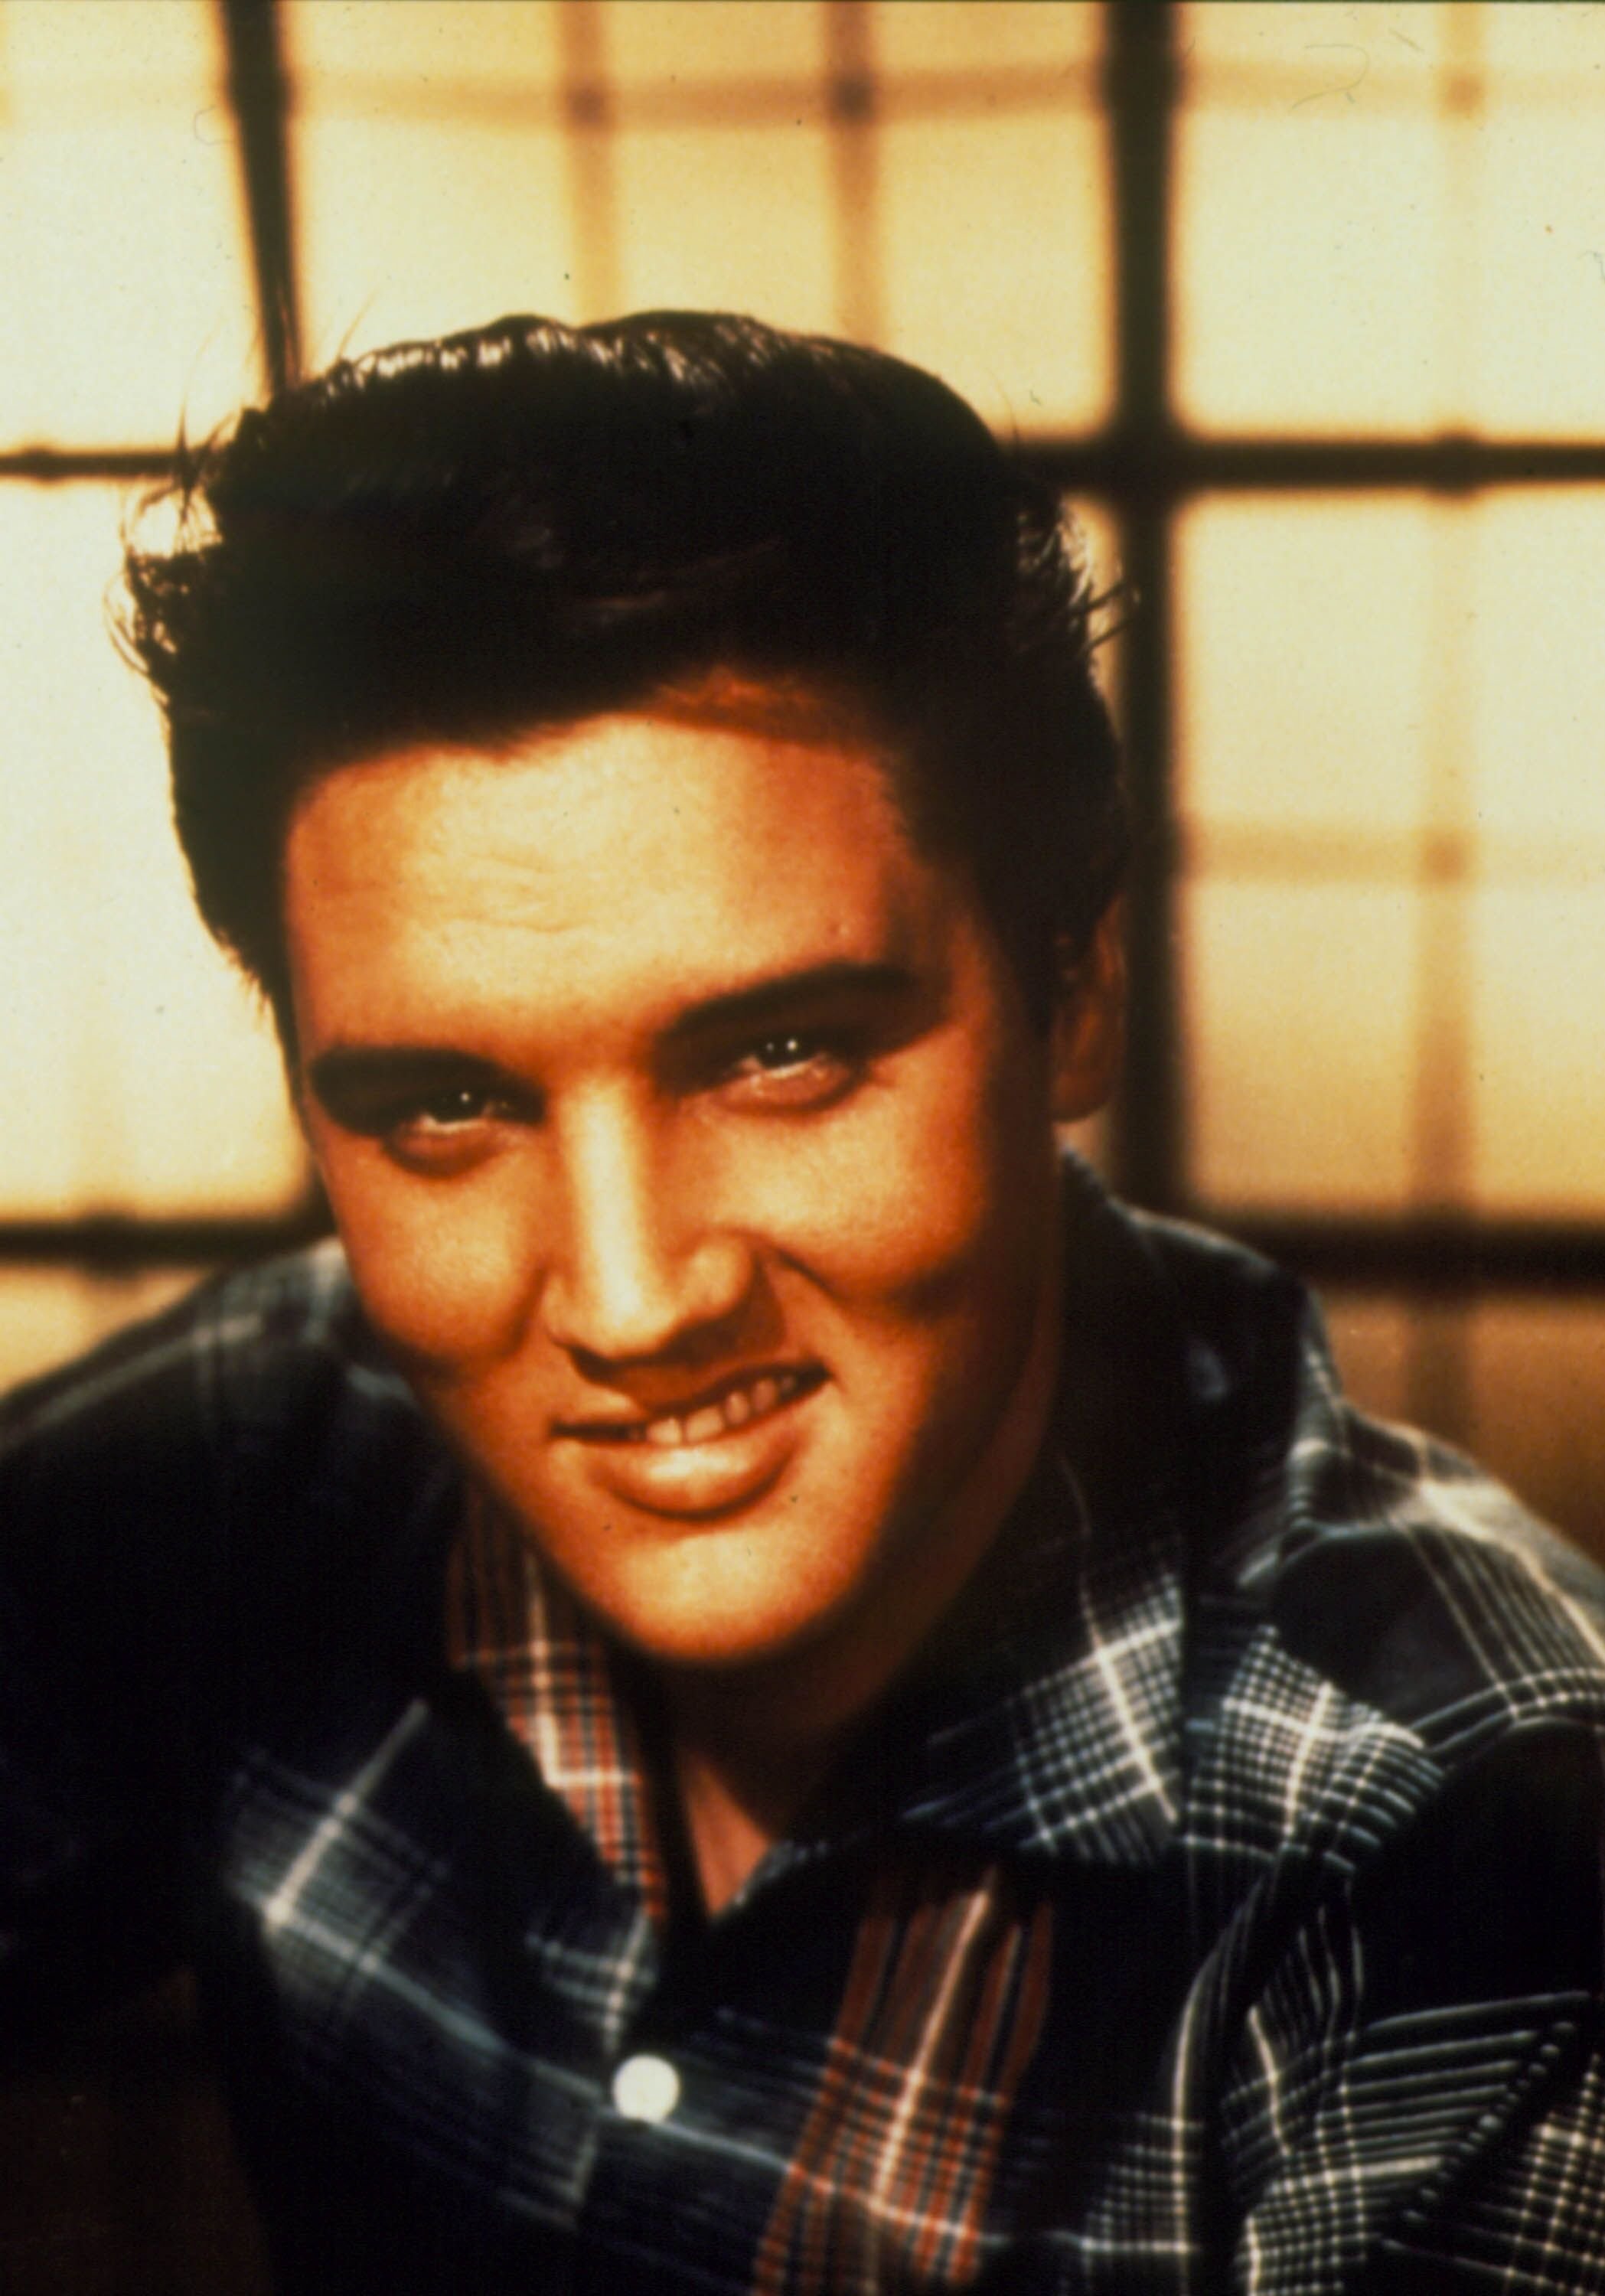 Late singer Elvis Presley poses for a studio portrait. | Photo: Getty Images